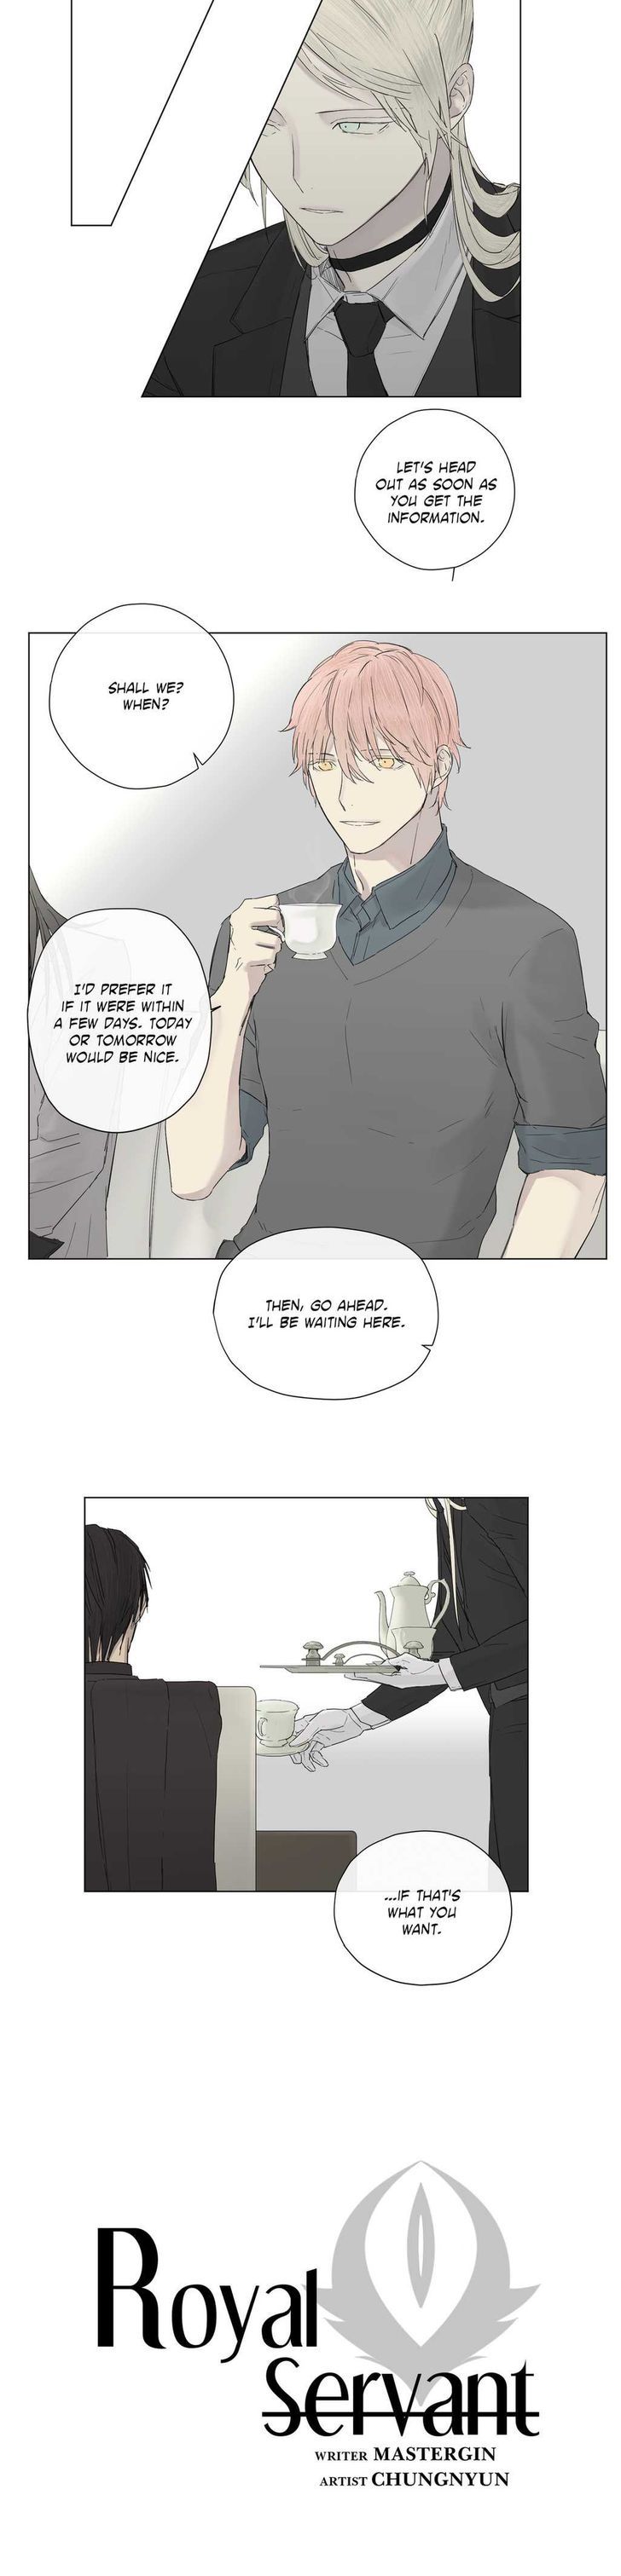 Royal Servant - Chapter 10 Page 5